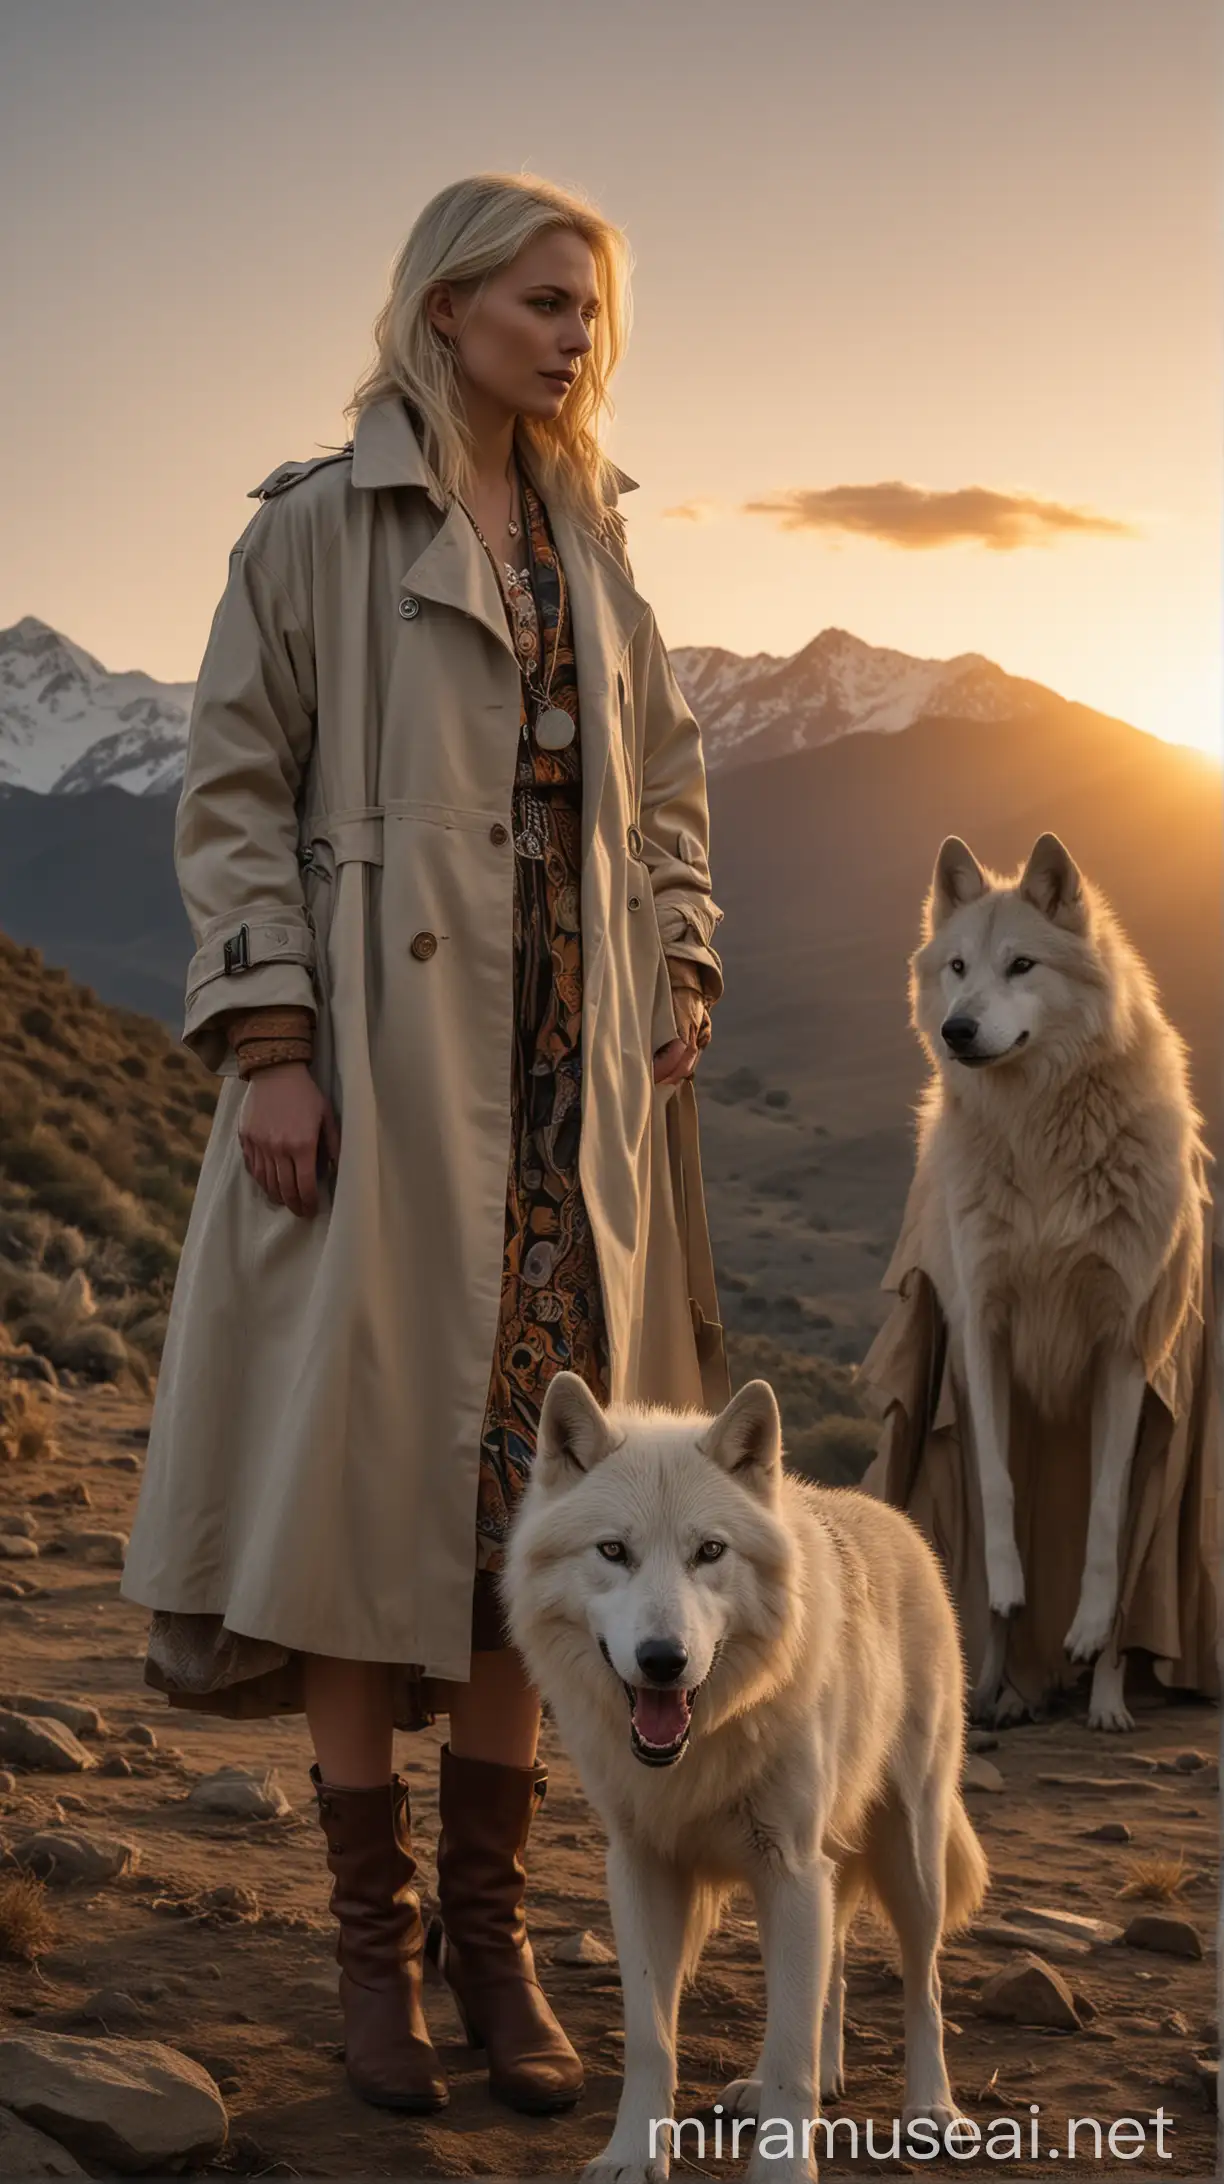 Movie poster, 40 year old man in a trench coat standing left, 30 year old blonde woman in an exotic dress standing right, a white wolf like dog in the middle, a sunset, mountain range, Taken with a Sony ZV-1 at 24mm focal length 